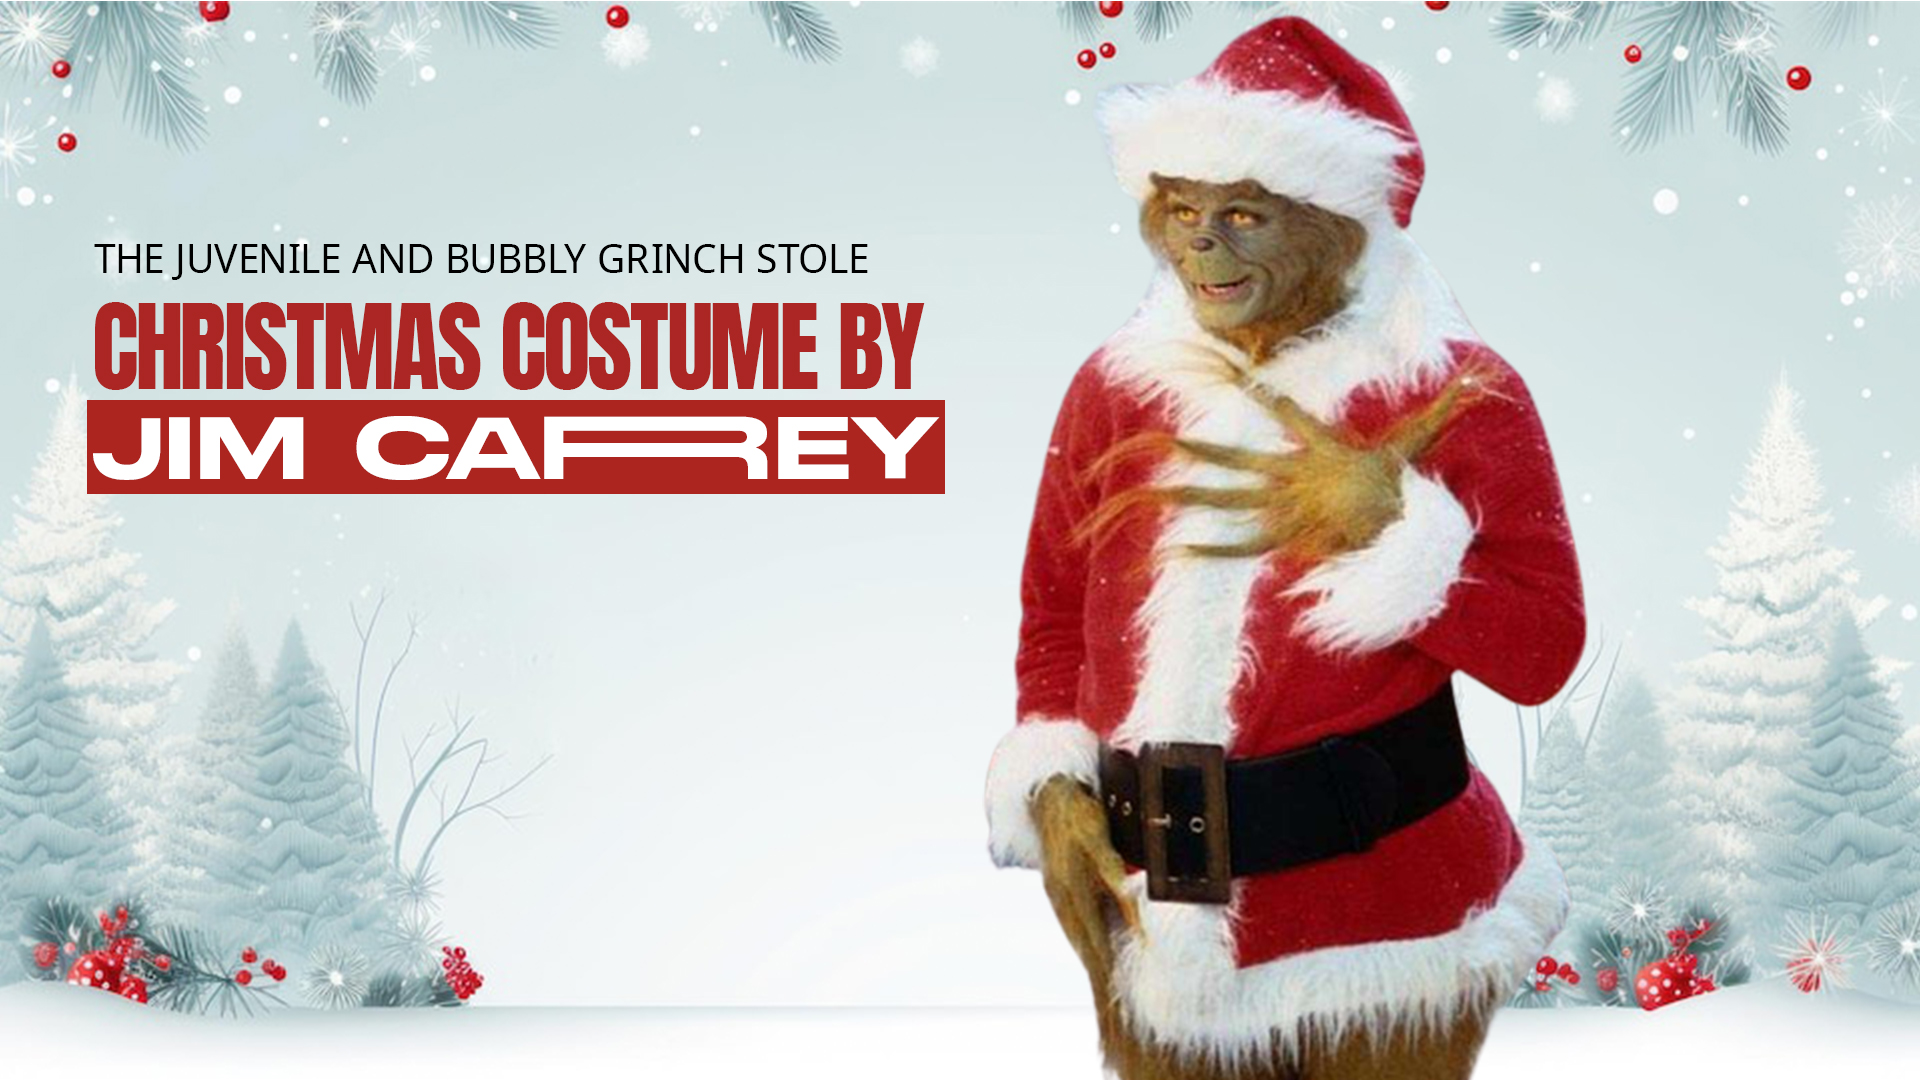 The Juvenile And Bubbly Grinch Stole Christmas Costume By Jim Carrey